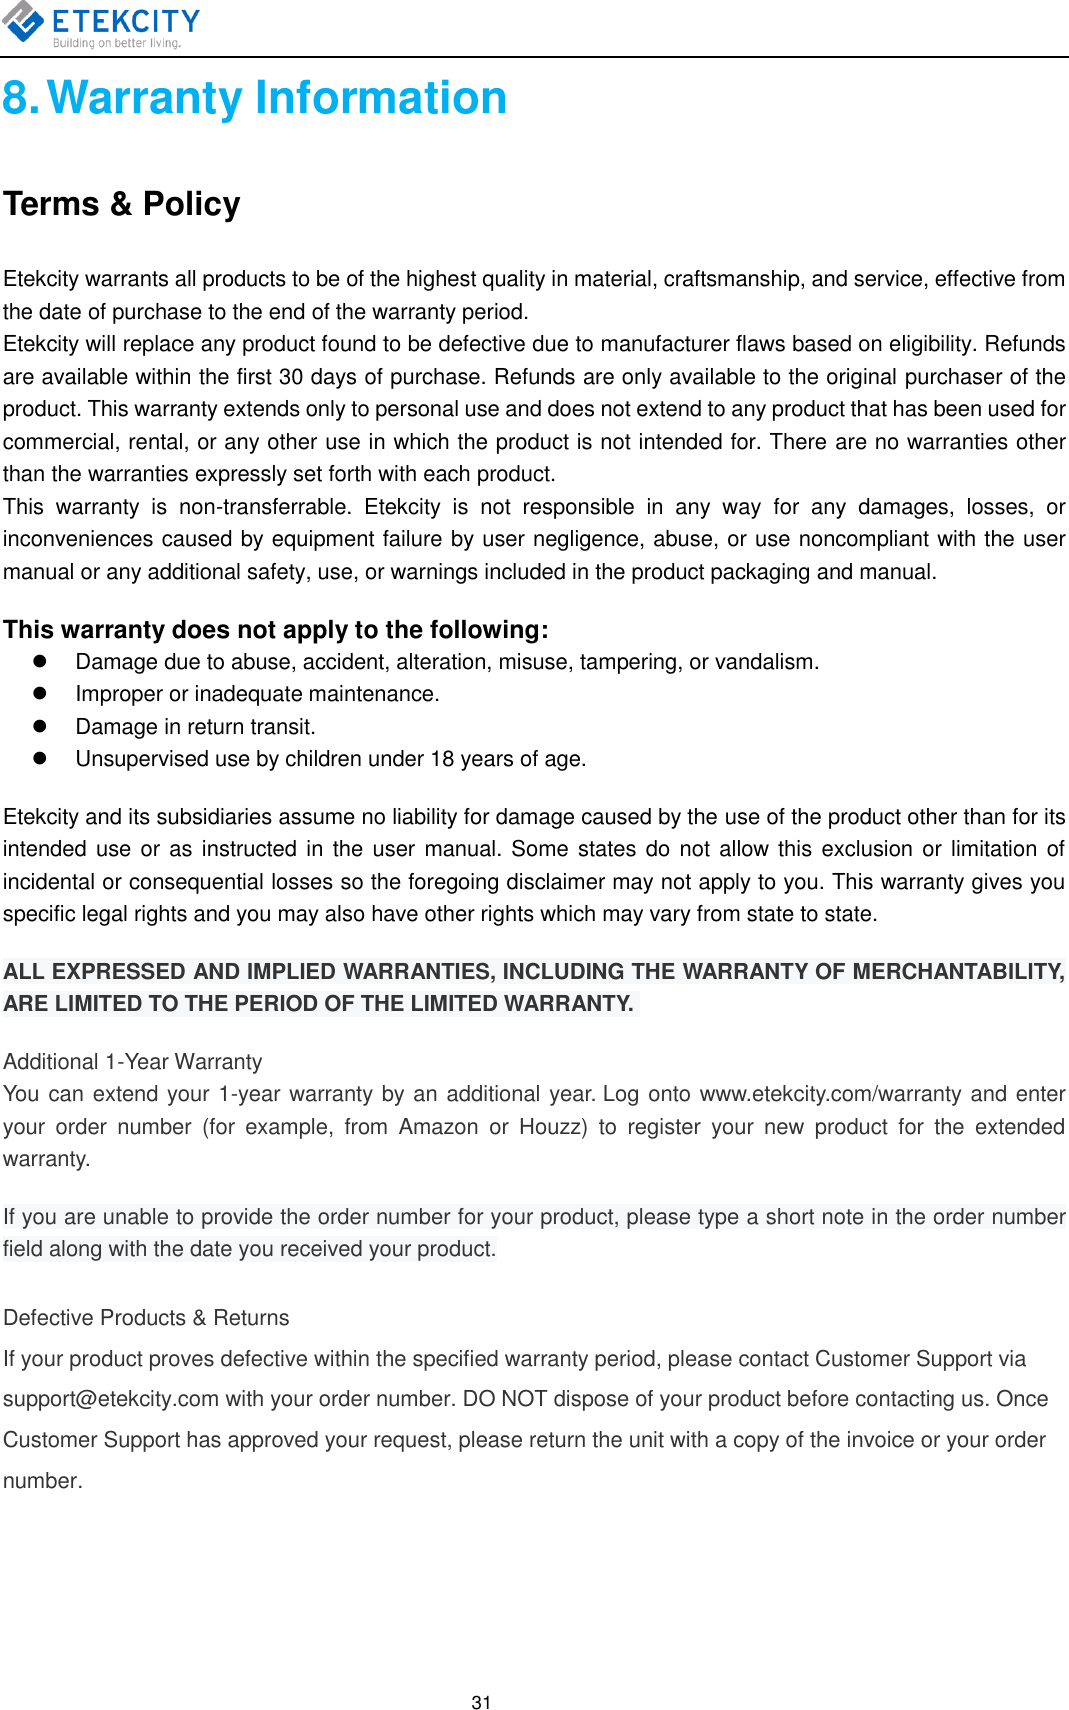   31 8. Warranty Information Terms &amp; Policy Etekcity warrants all products to be of the highest quality in material, craftsmanship, and service, effective from the date of purchase to the end of the warranty period. Etekcity will replace any product found to be defective due to manufacturer flaws based on eligibility. Refunds are available within the first 30 days of purchase. Refunds are only available to the original purchaser of the product. This warranty extends only to personal use and does not extend to any product that has been used for commercial, rental, or any other use in which the product is not intended for. There are no warranties other than the warranties expressly set forth with each product. This  warranty  is  non-transferrable.  Etekcity  is  not  responsible  in  any  way  for  any  damages,  losses,  or inconveniences caused by equipment failure by user negligence, abuse, or use noncompliant with the user manual or any additional safety, use, or warnings included in the product packaging and manual. This warranty does not apply to the following:   Damage due to abuse, accident, alteration, misuse, tampering, or vandalism.   Improper or inadequate maintenance.   Damage in return transit.   Unsupervised use by children under 18 years of age. Etekcity and its subsidiaries assume no liability for damage caused by the use of the product other than for its intended use or as instructed in the user  manual. Some  states do not allow this exclusion or limitation of incidental or consequential losses so the foregoing disclaimer may not apply to you. This warranty gives you specific legal rights and you may also have other rights which may vary from state to state. ALL EXPRESSED AND IMPLIED WARRANTIES, INCLUDING THE WARRANTY OF MERCHANTABILITY, ARE LIMITED TO THE PERIOD OF THE LIMITED WARRANTY.  Additional 1-Year Warranty  You can extend your 1-year warranty by an additional year. Log onto www.etekcity.com/warranty and enter your  order  number  (for  example,  from  Amazon  or  Houzz)  to  register  your  new  product  for  the  extended warranty. If you are unable to provide the order number for your product, please type a short note in the order number field along with the date you received your product. Defective Products &amp; Returns  If your product proves defective within the specified warranty period, please contact Customer Support via support@etekcity.com with your order number. DO NOT dispose of your product before contacting us. Once Customer Support has approved your request, please return the unit with a copy of the invoice or your order number.   